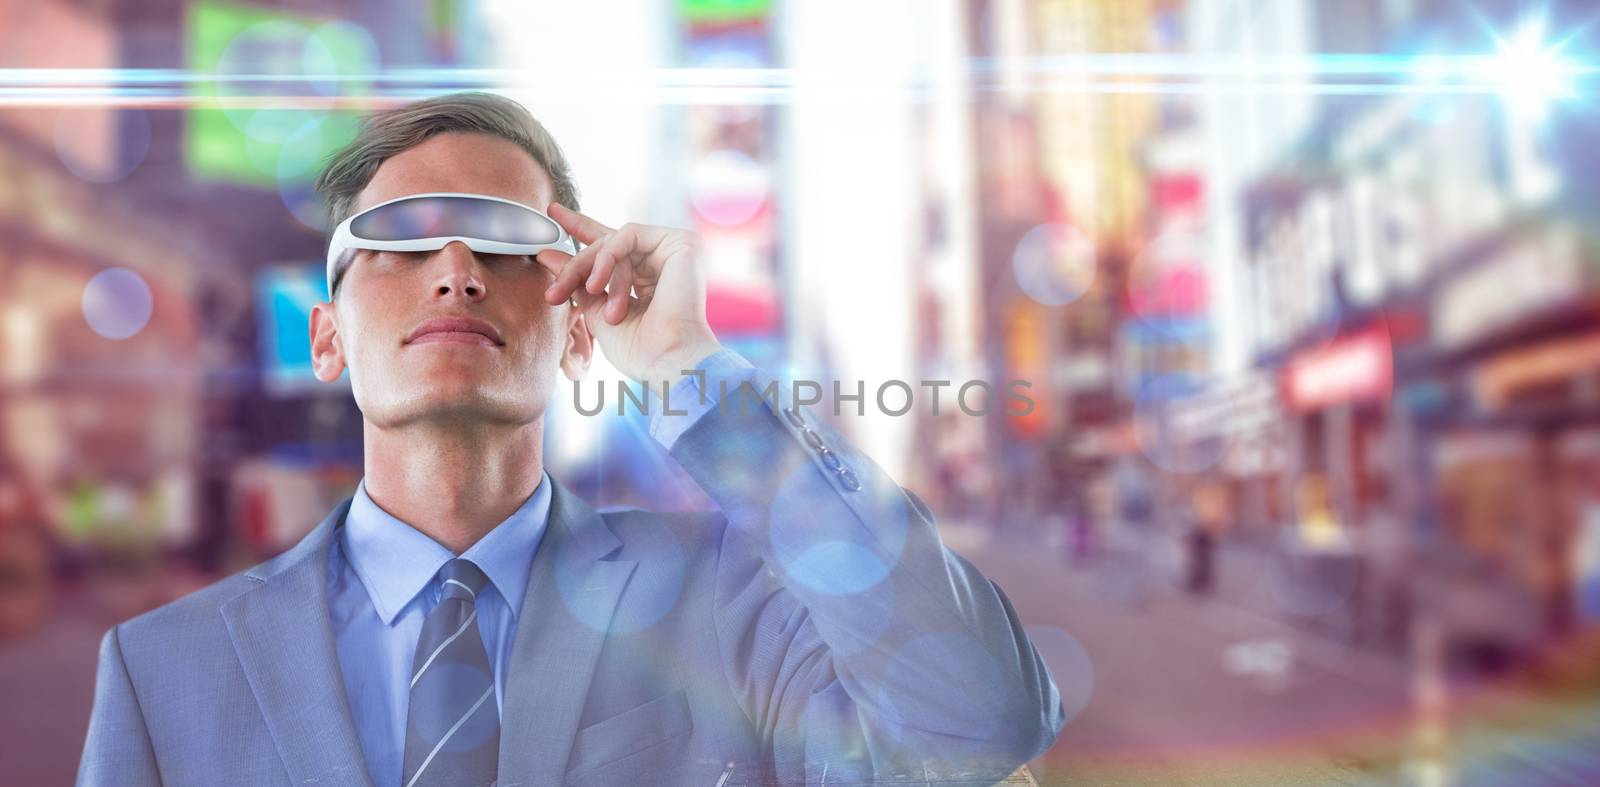 Composite image of businessman using virtual reality glasses against blurry background by Wavebreakmedia